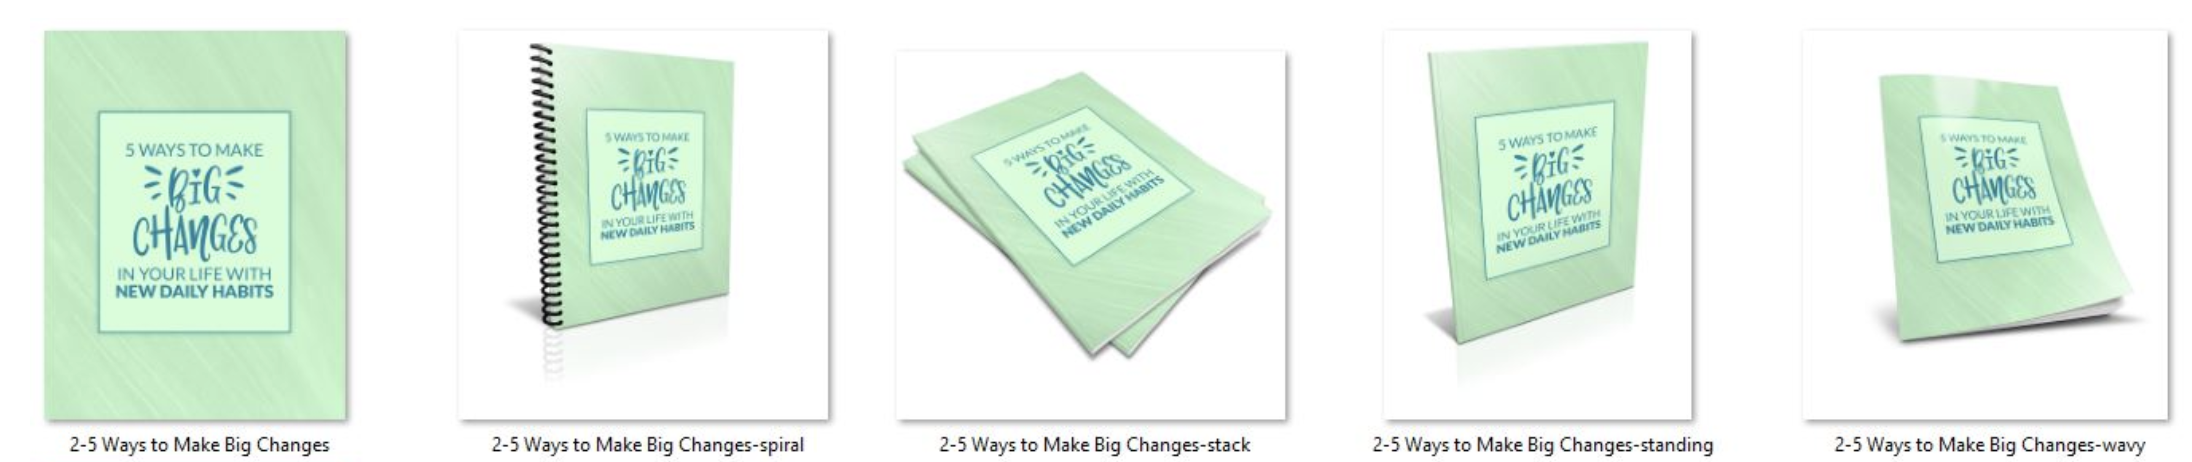 Make Big Changes Report Covers